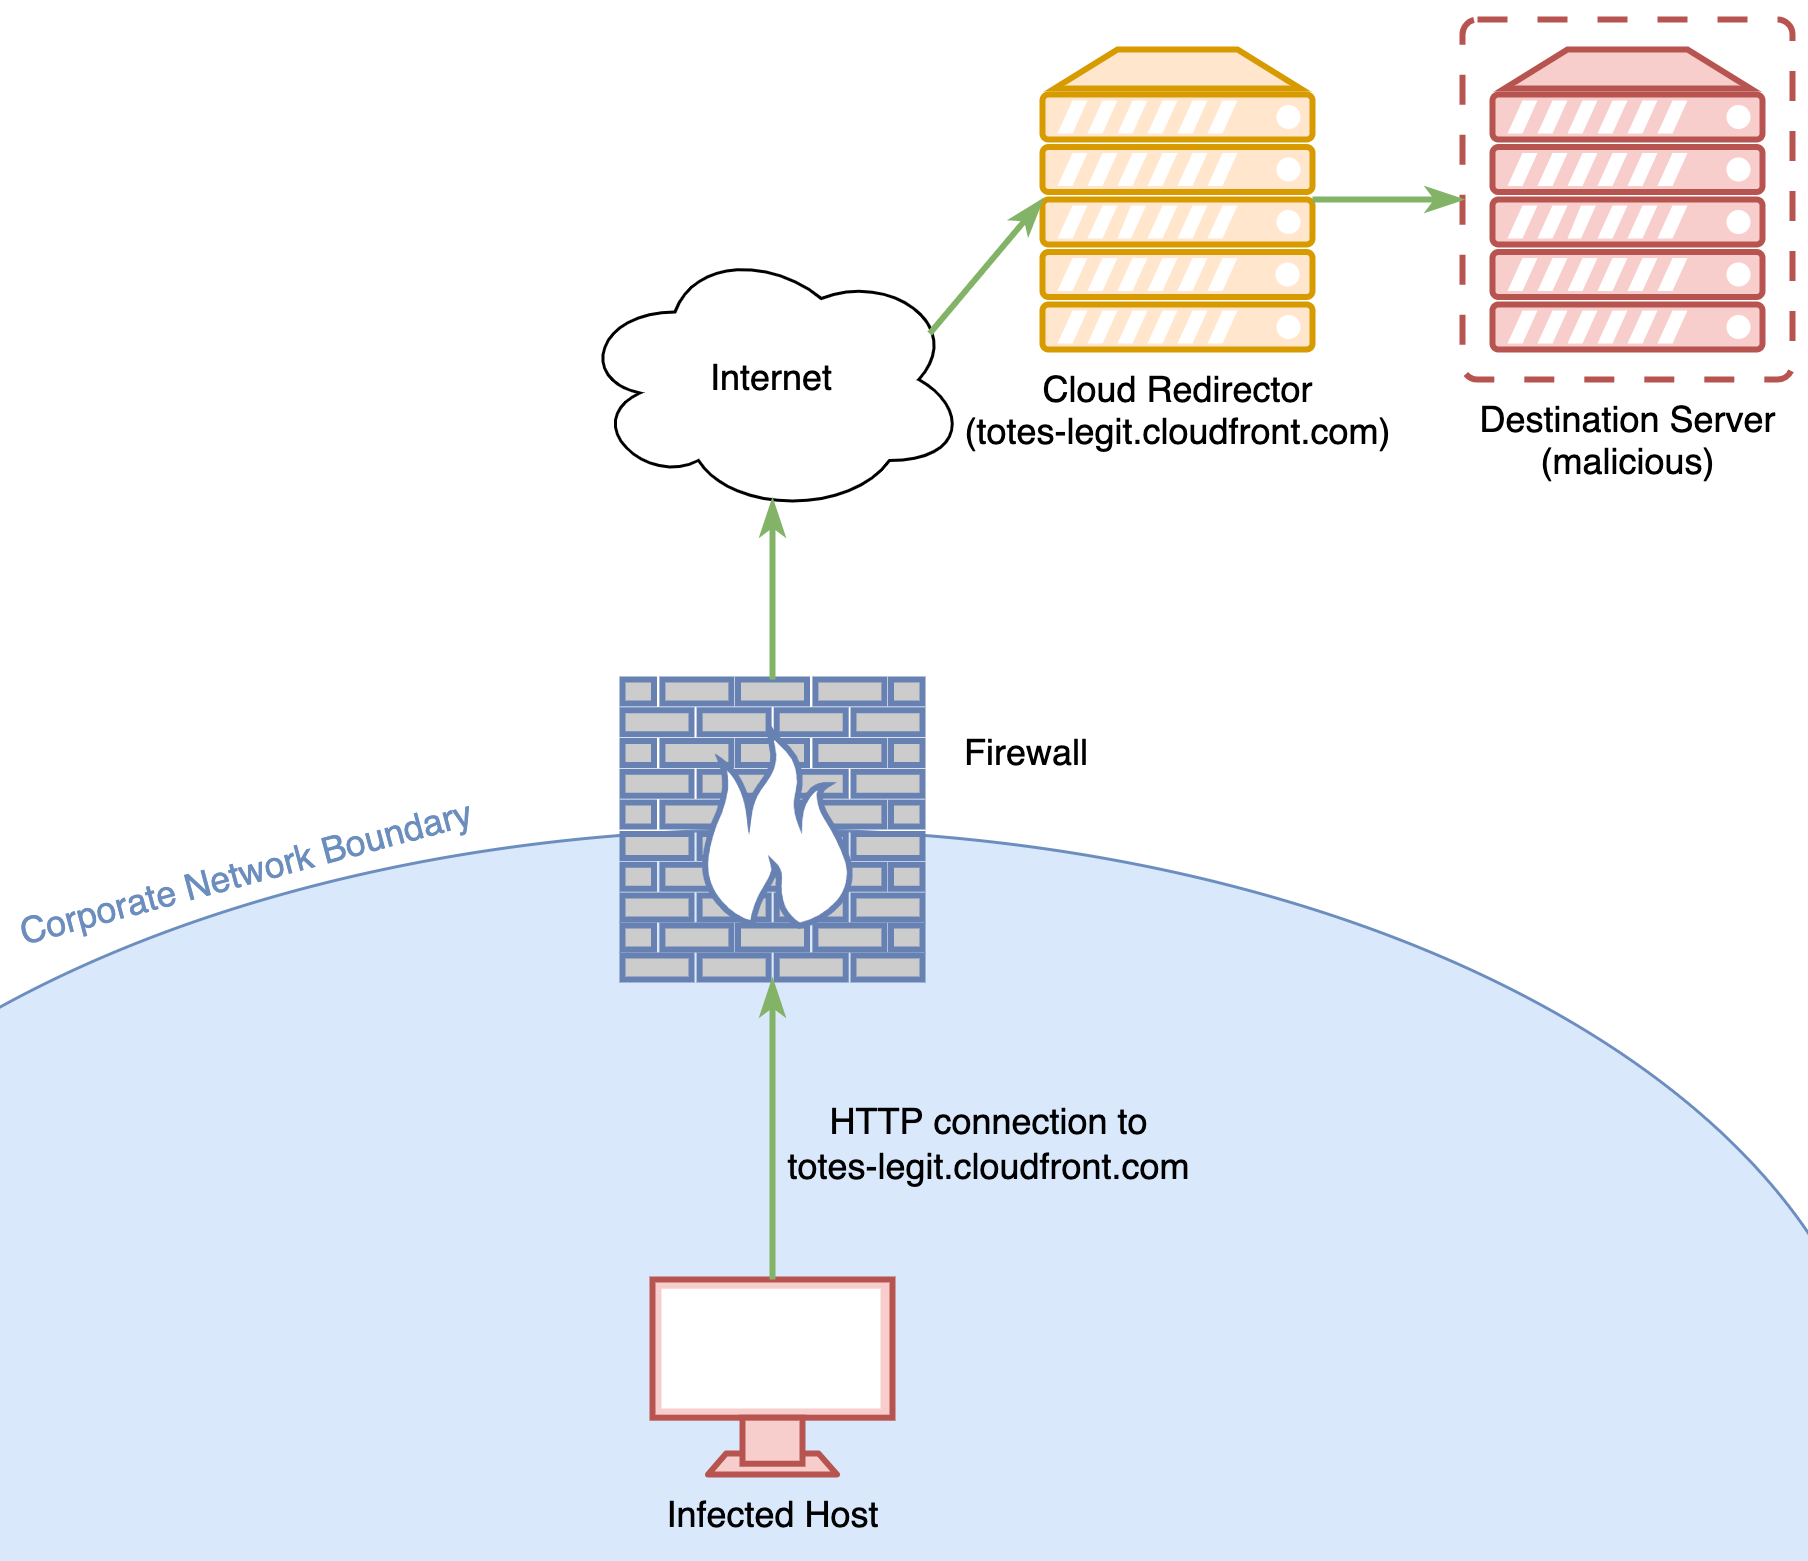 Diagram showing network flow when using a Cloudfront redirector